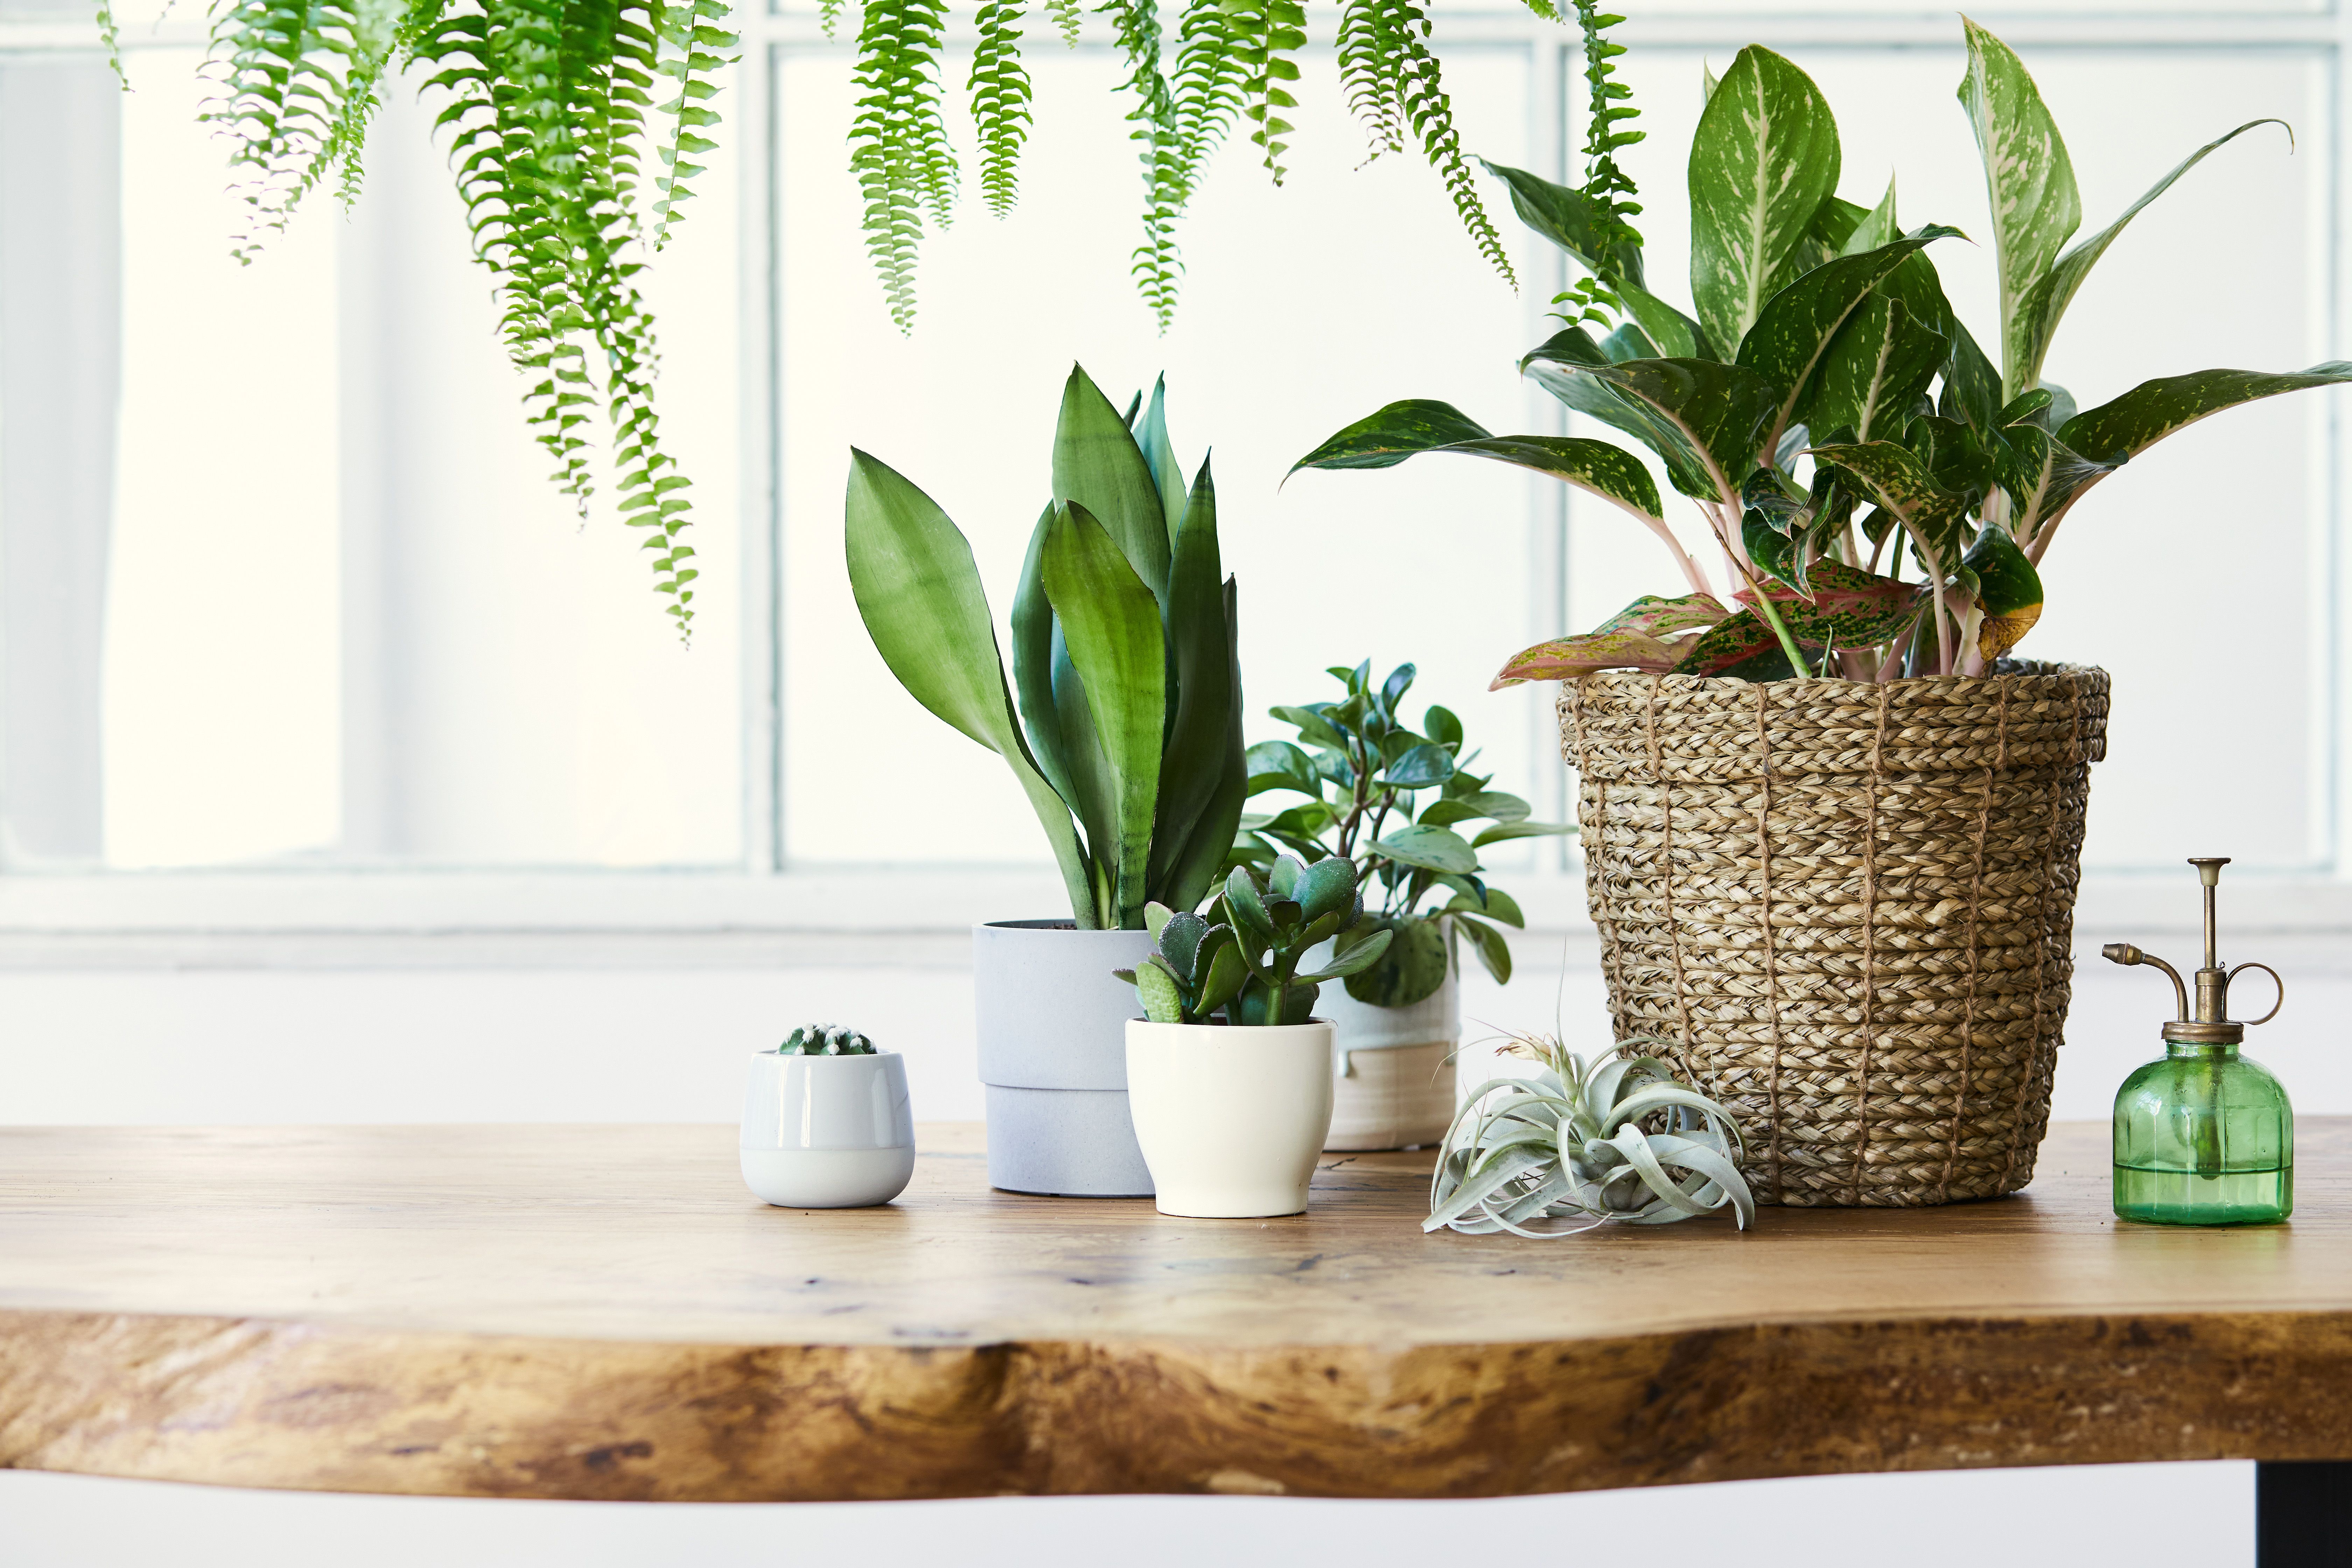 A group of indoor plants by a window against a white background